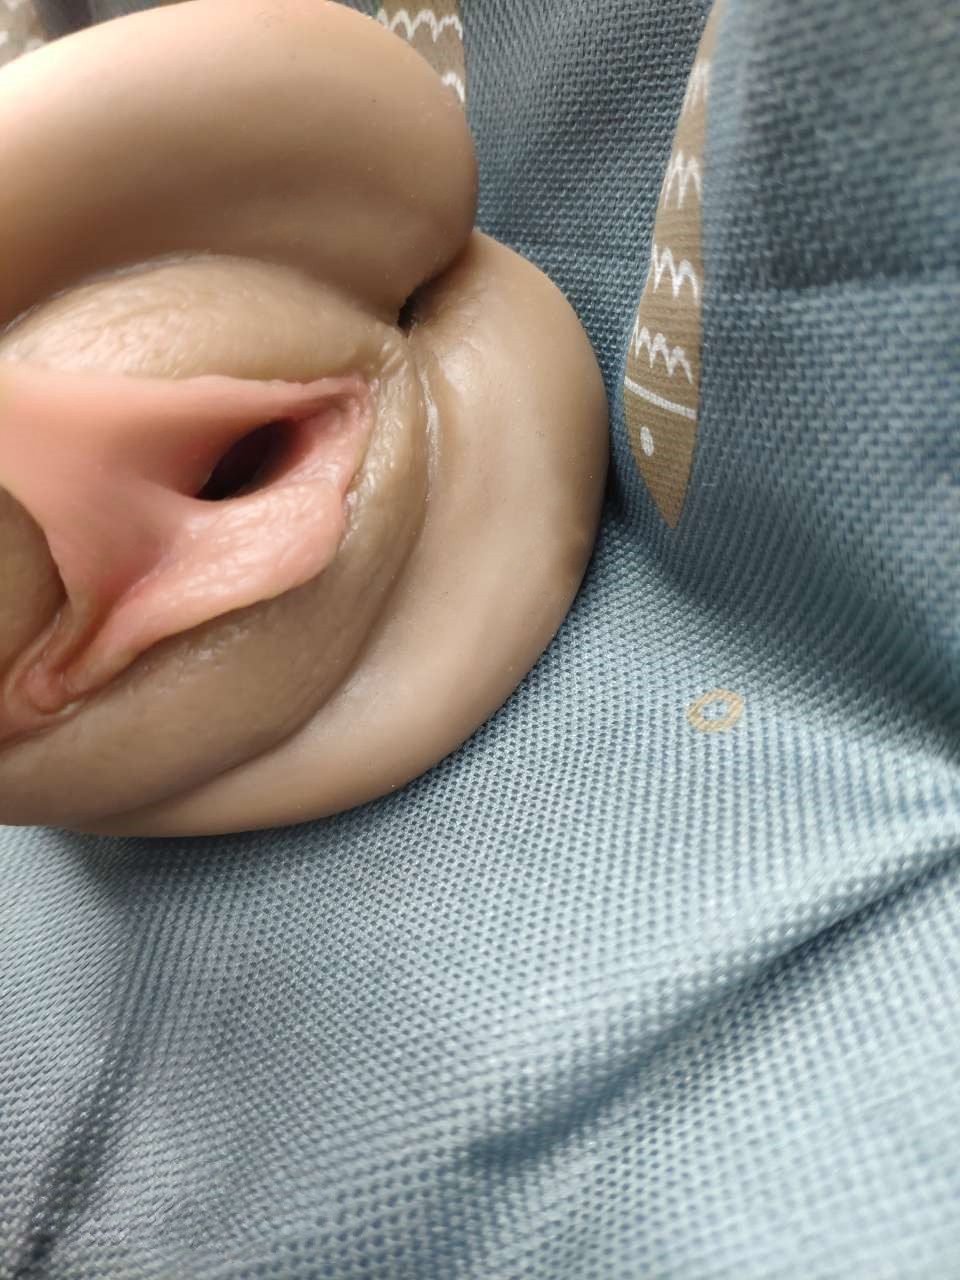 Three Channel Mouth Vaginal Anal Pocket Pussy photo review